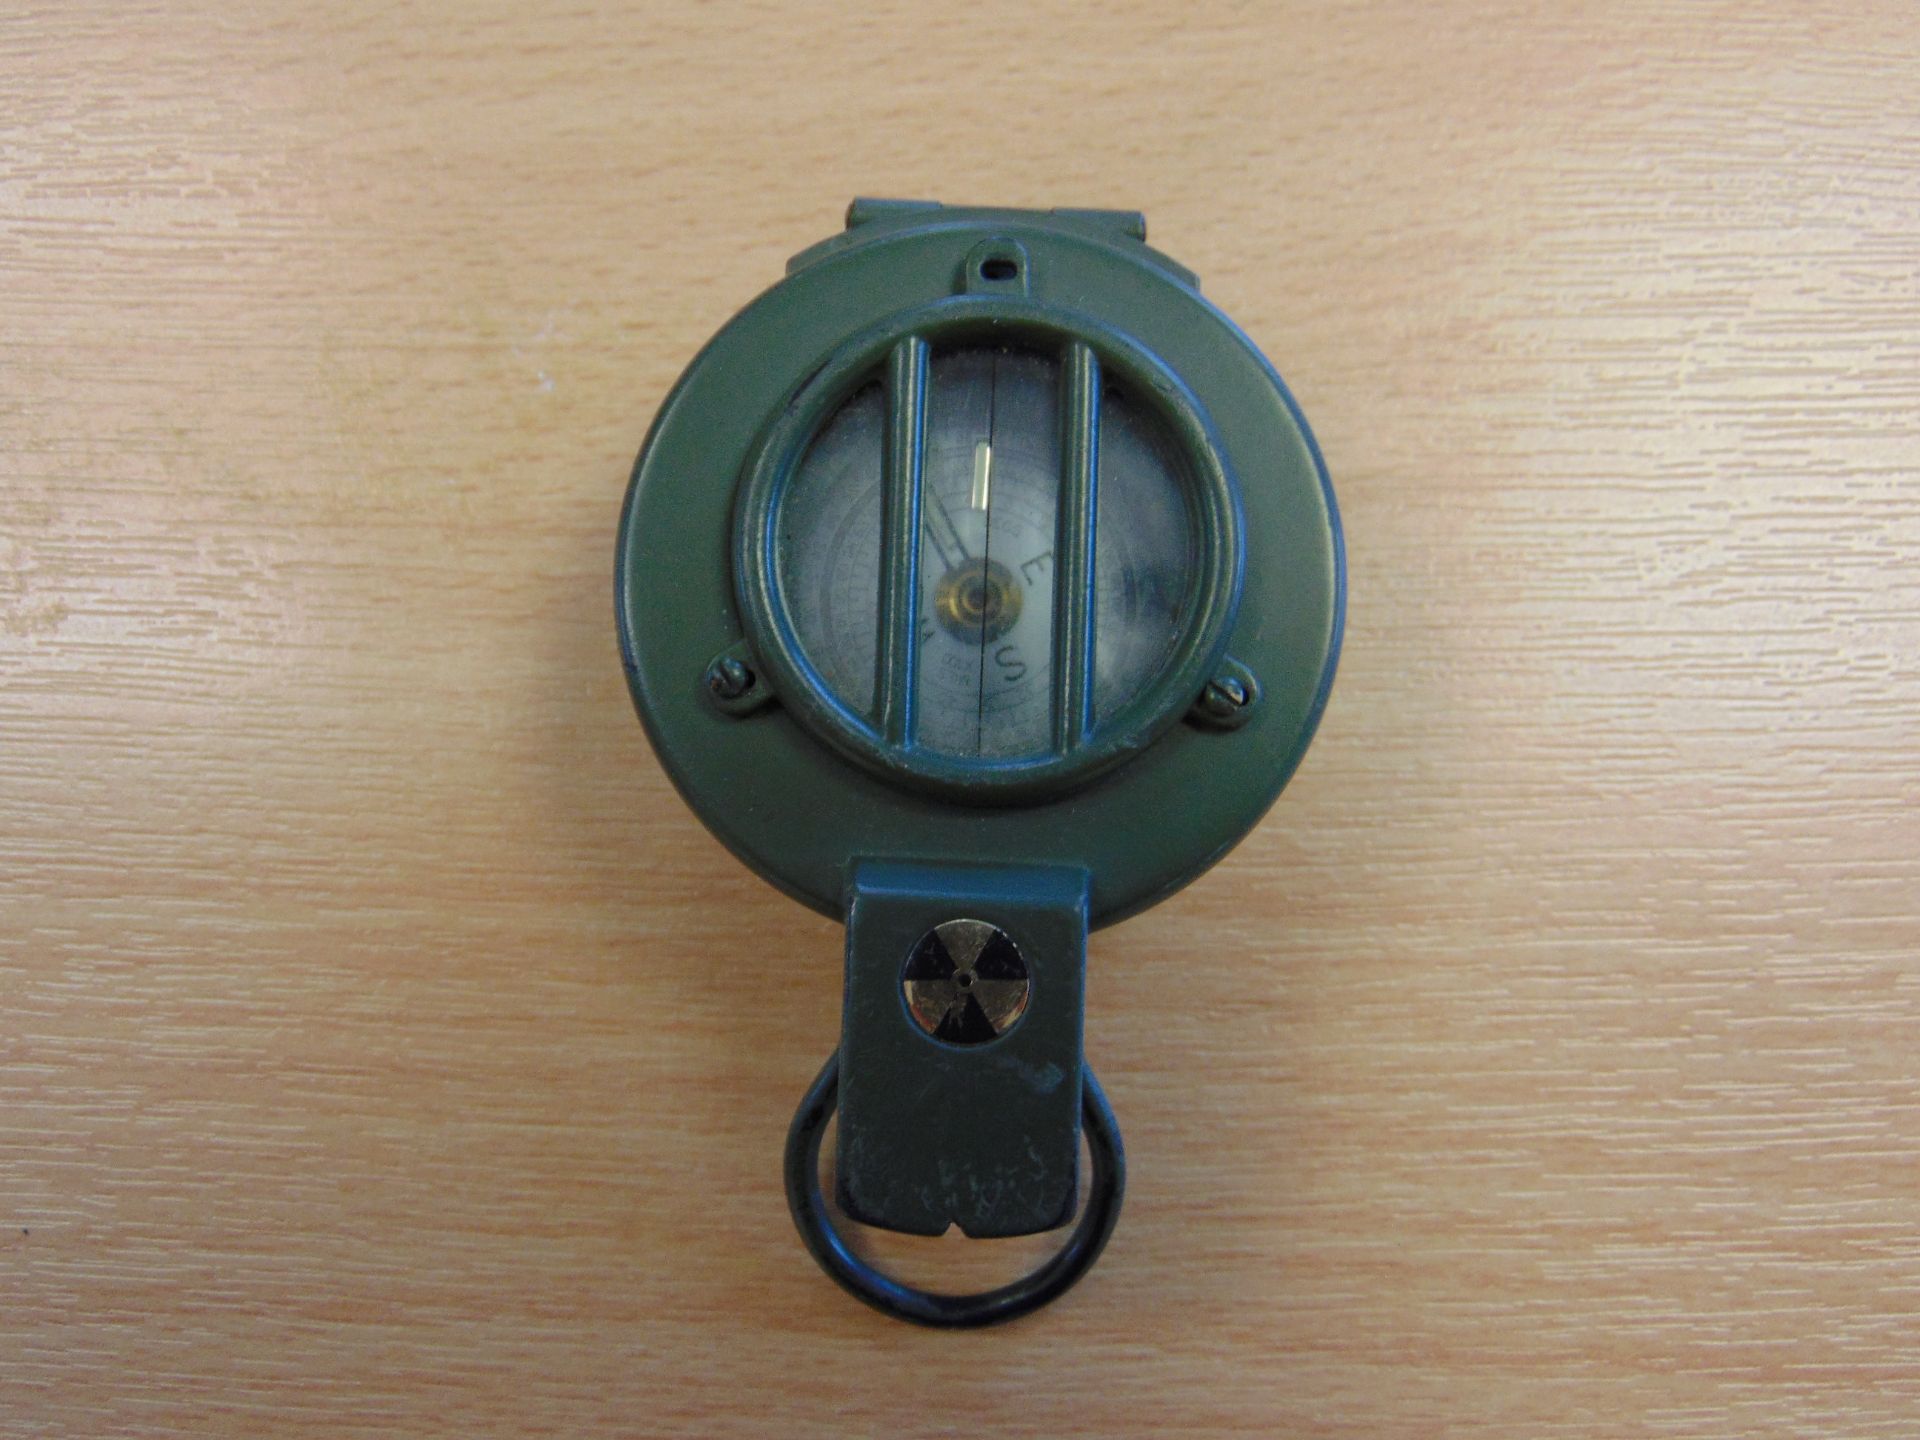 Francis Barker British Army Prismatic Compass in Mils - Image 13 of 13